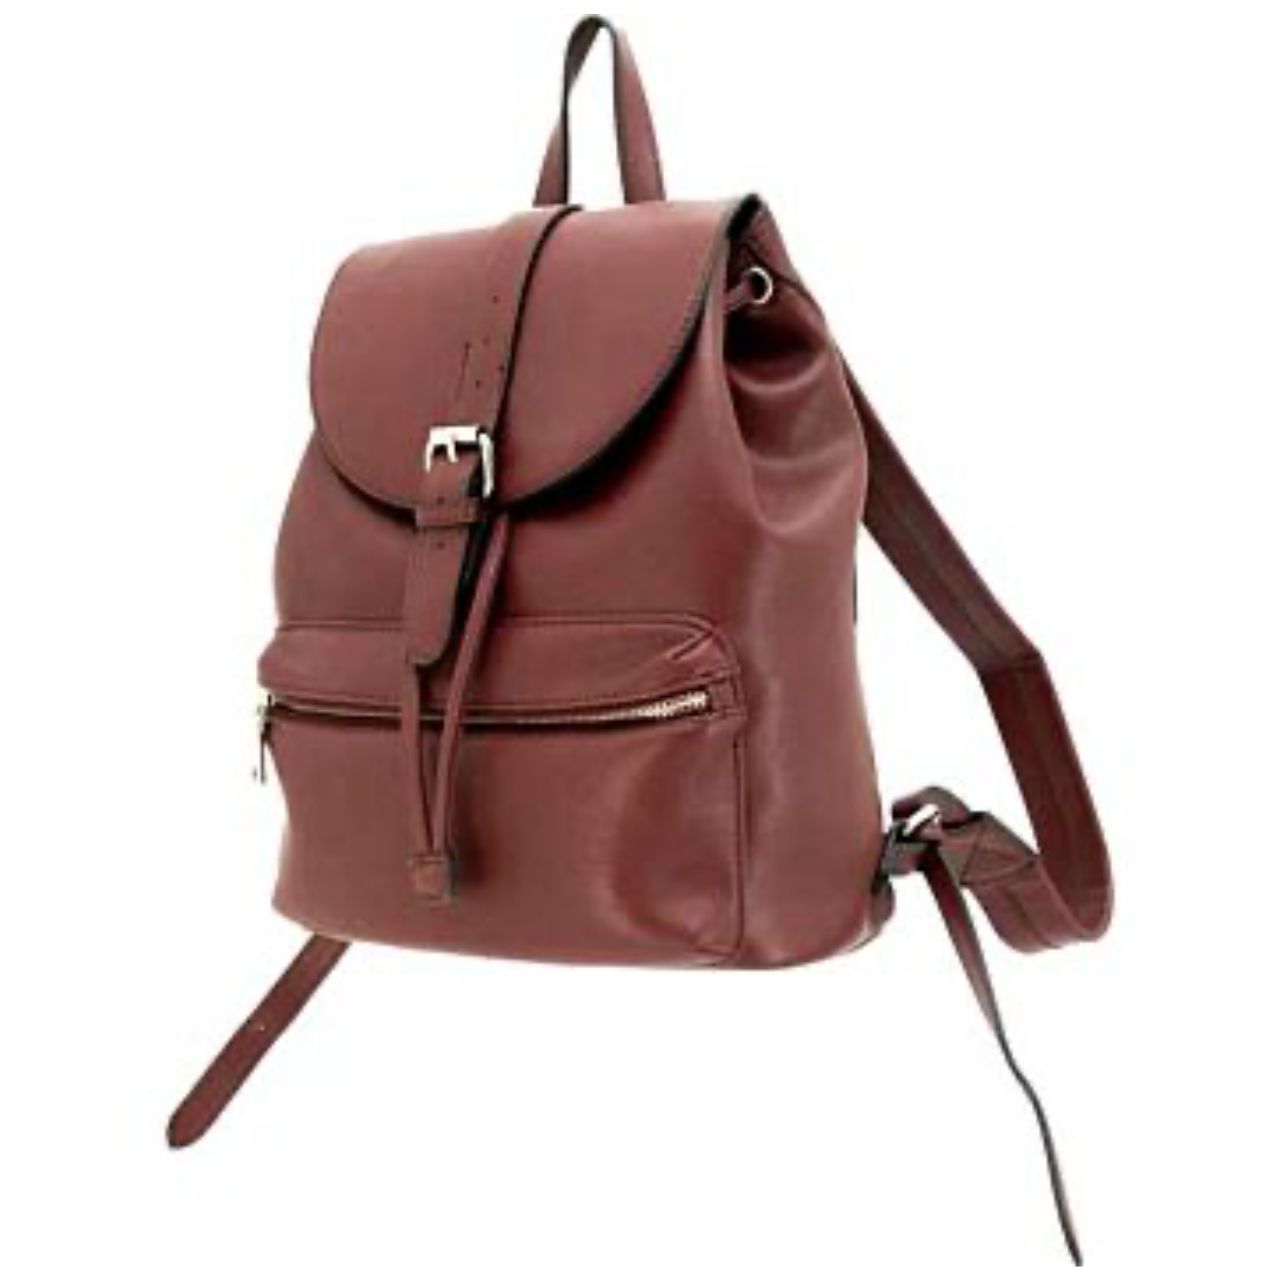 Angled view of Maroon colored "Amelia" concealed carry backpack